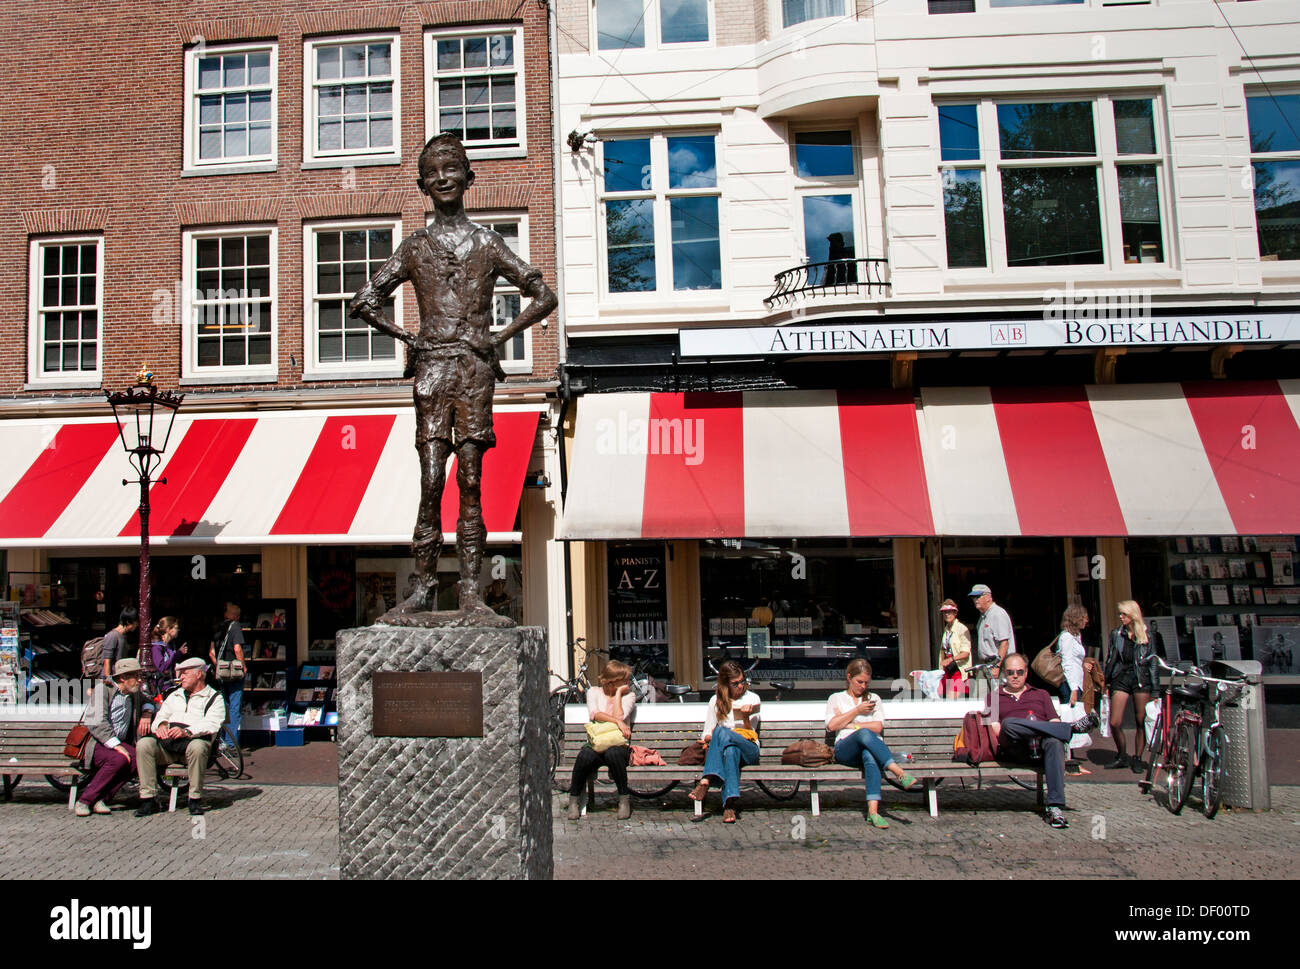 Netherlands - Amsterdam The Spui the statue of Het Lieverdje representing, the youth of Amsterdam Athenaeum Boekhandel Stock Photo